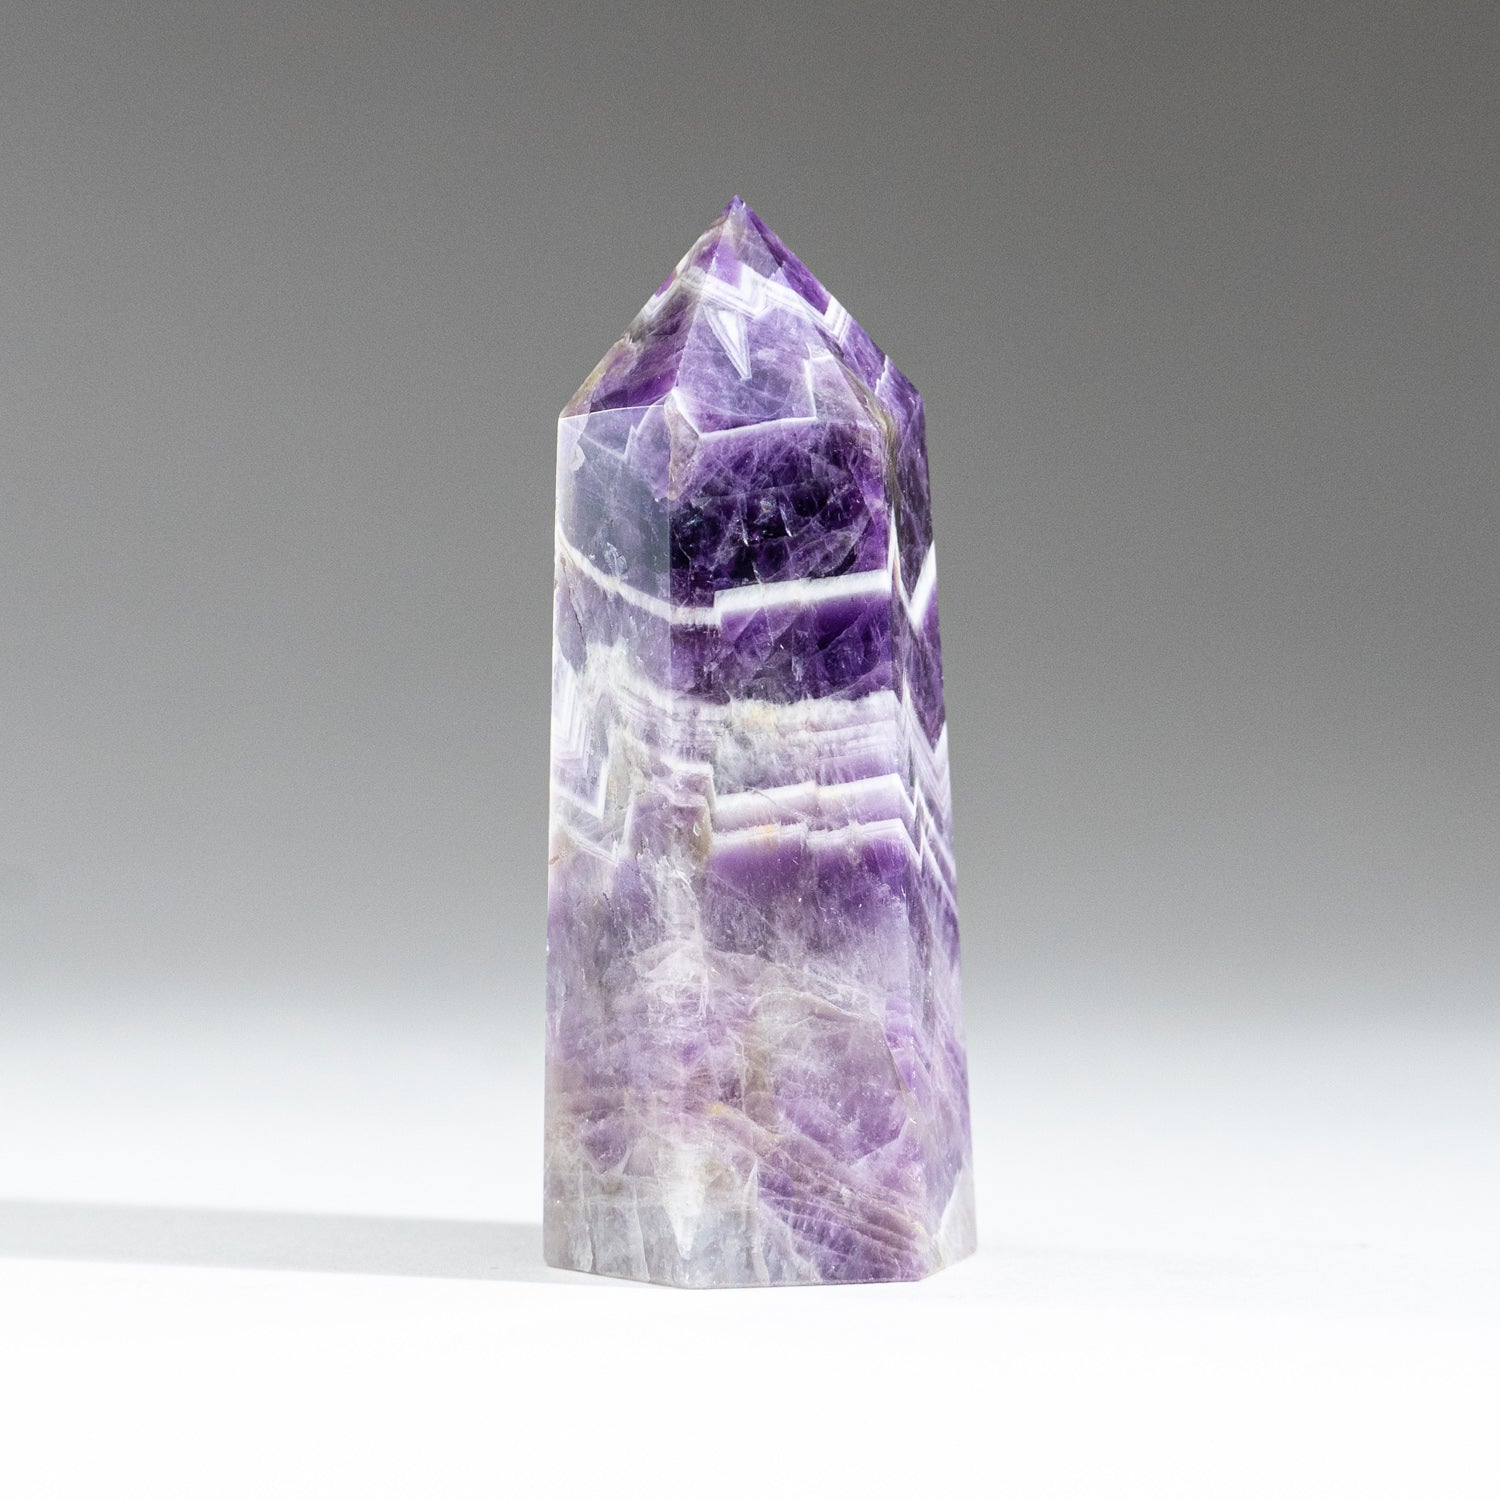 Polished Chevron Amethyst Point from Brazil (118 grams)